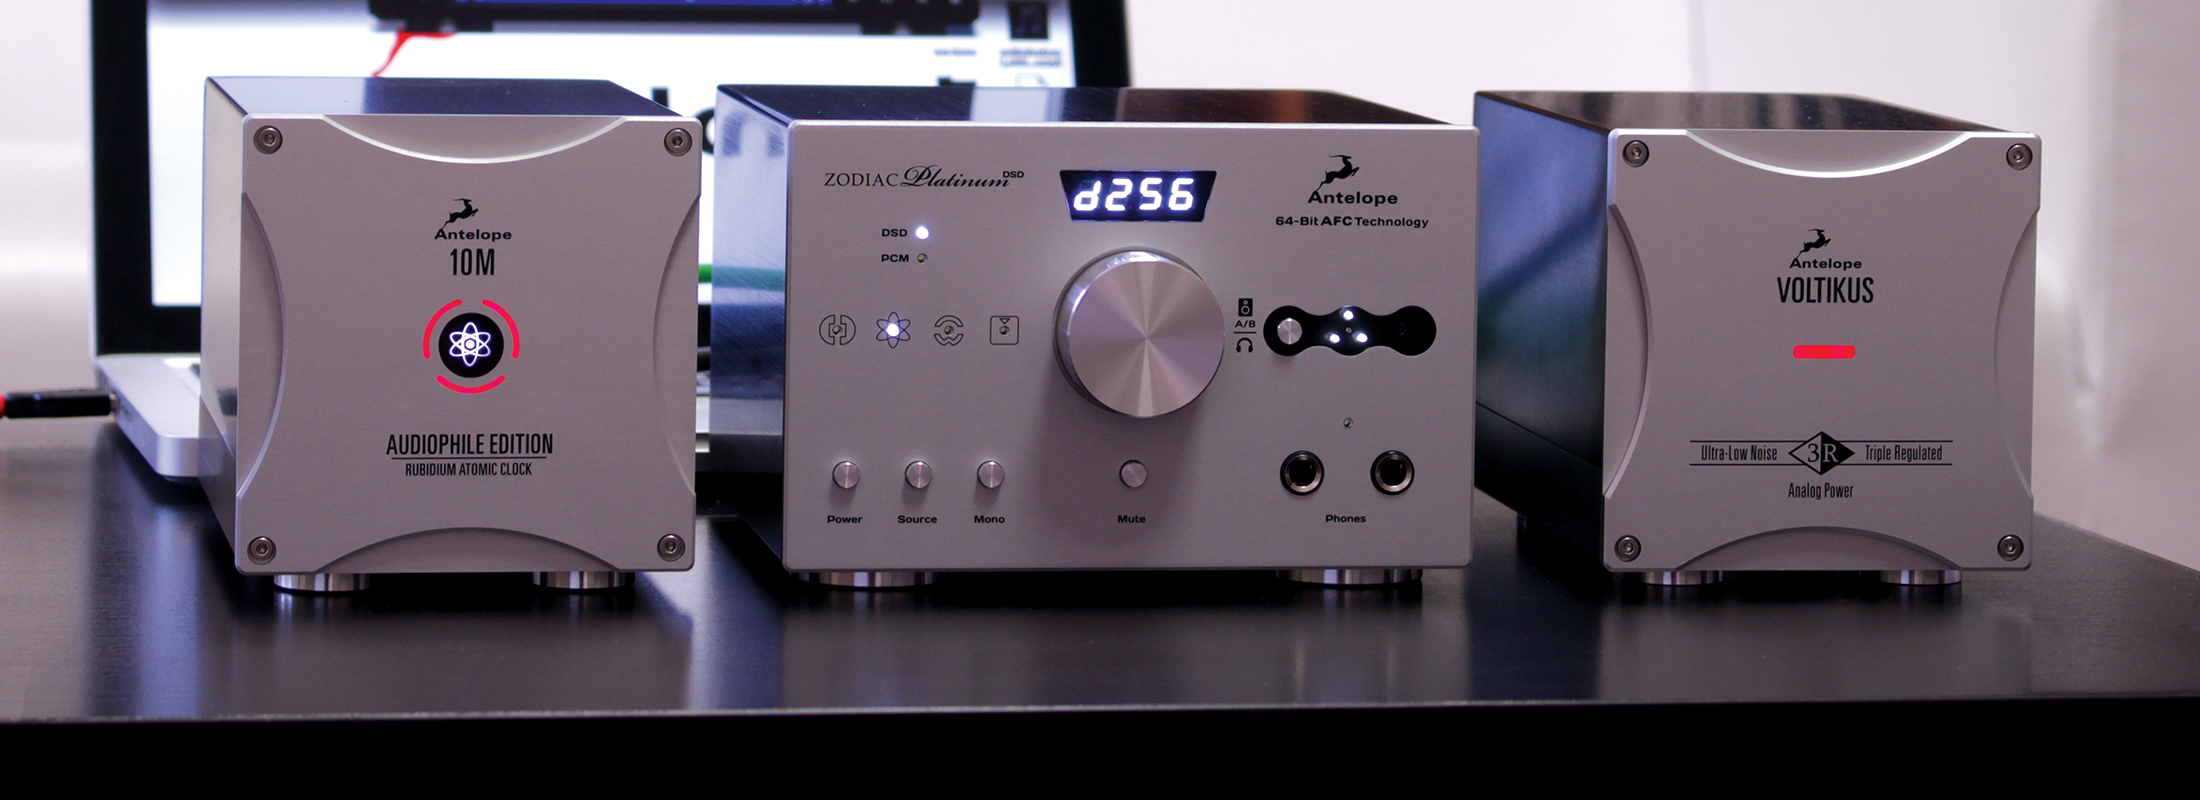 New for CES: The Antelope Audio Zodiac Platinum DSD DAC and Audiophile 10M Atomic Clock Combination Takes Your Listening Room to New Sensory Heights